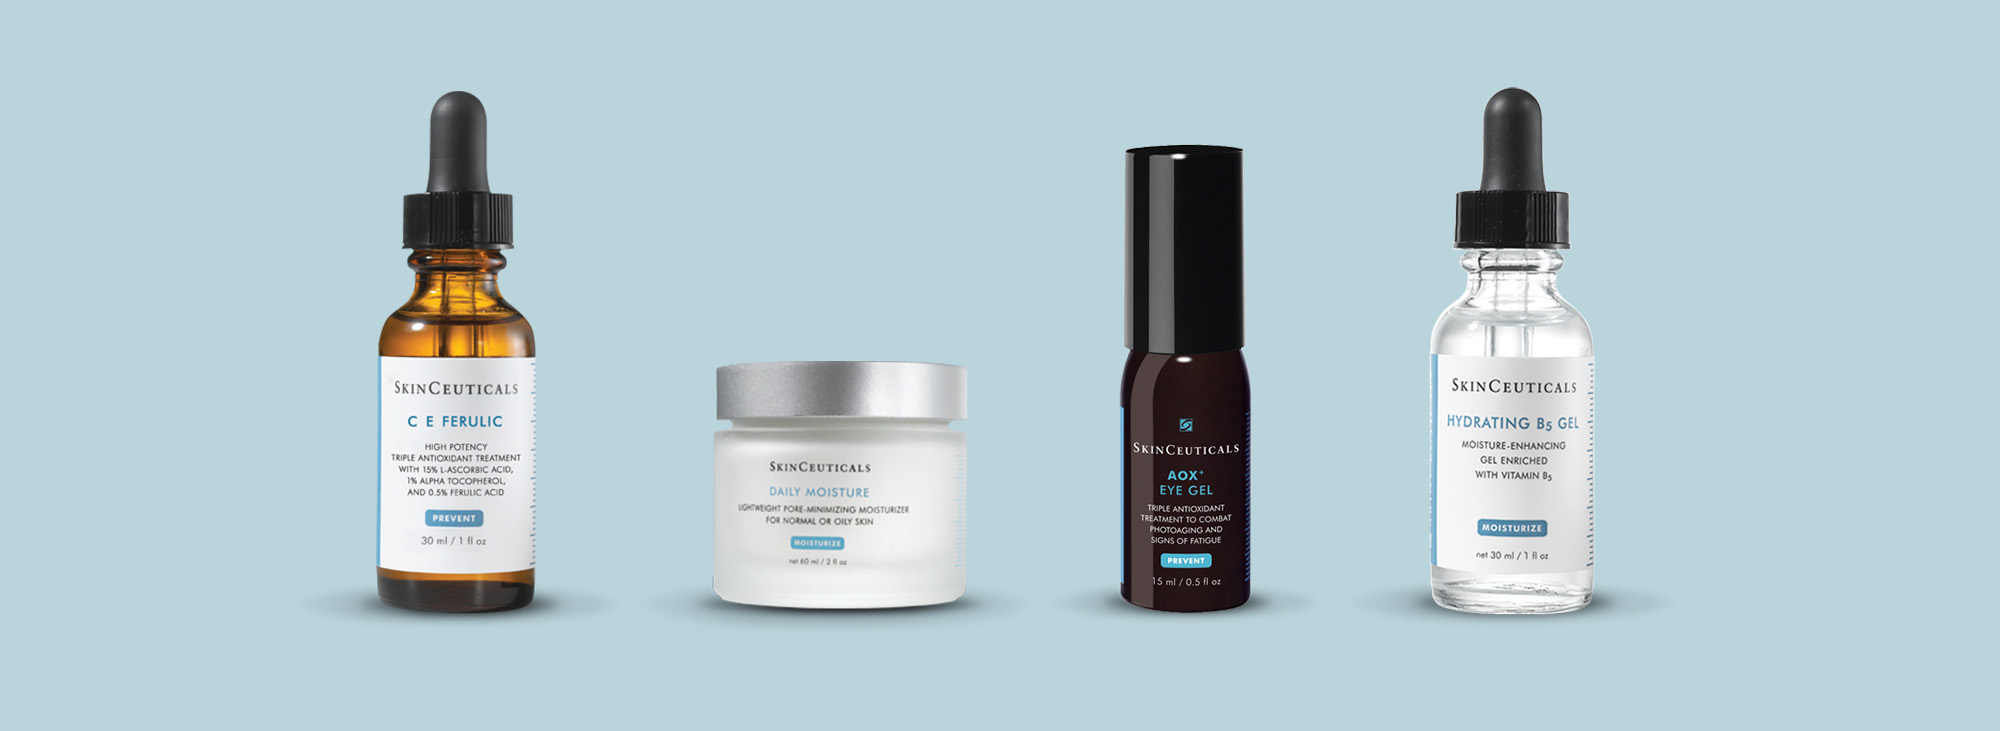 Skin Ceuticals Products